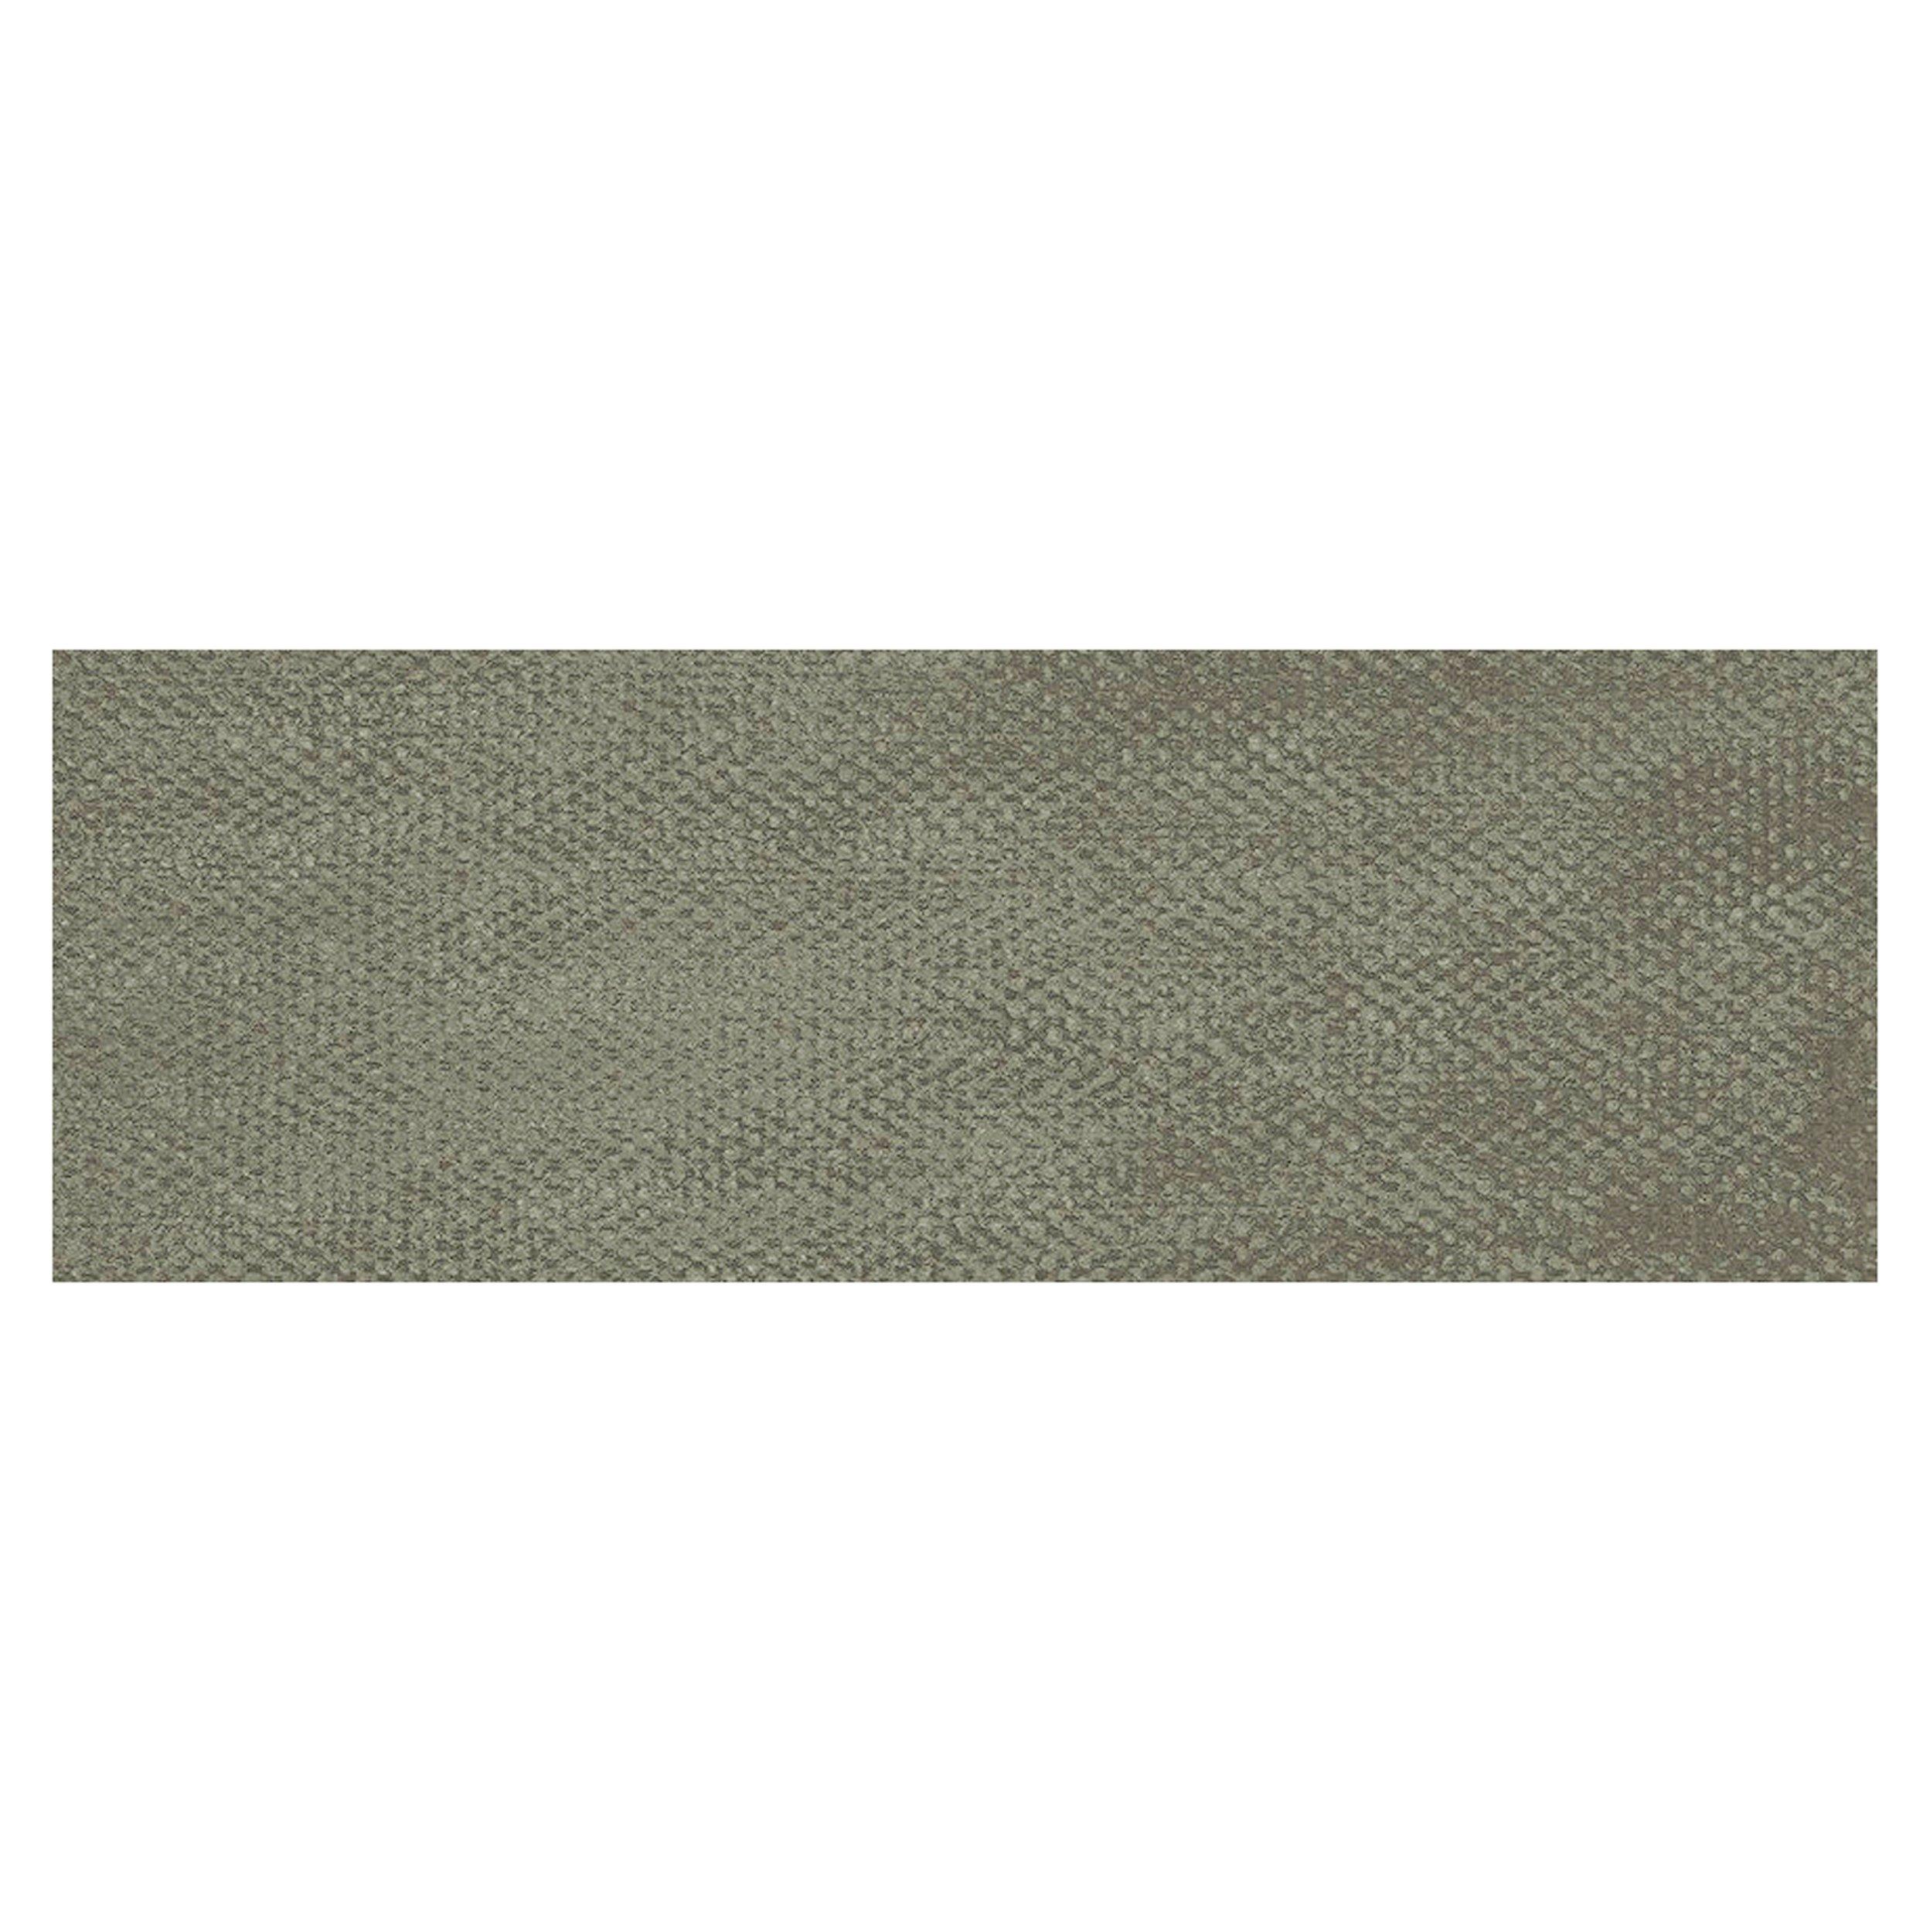 Army Green Polished Ceramic Tile